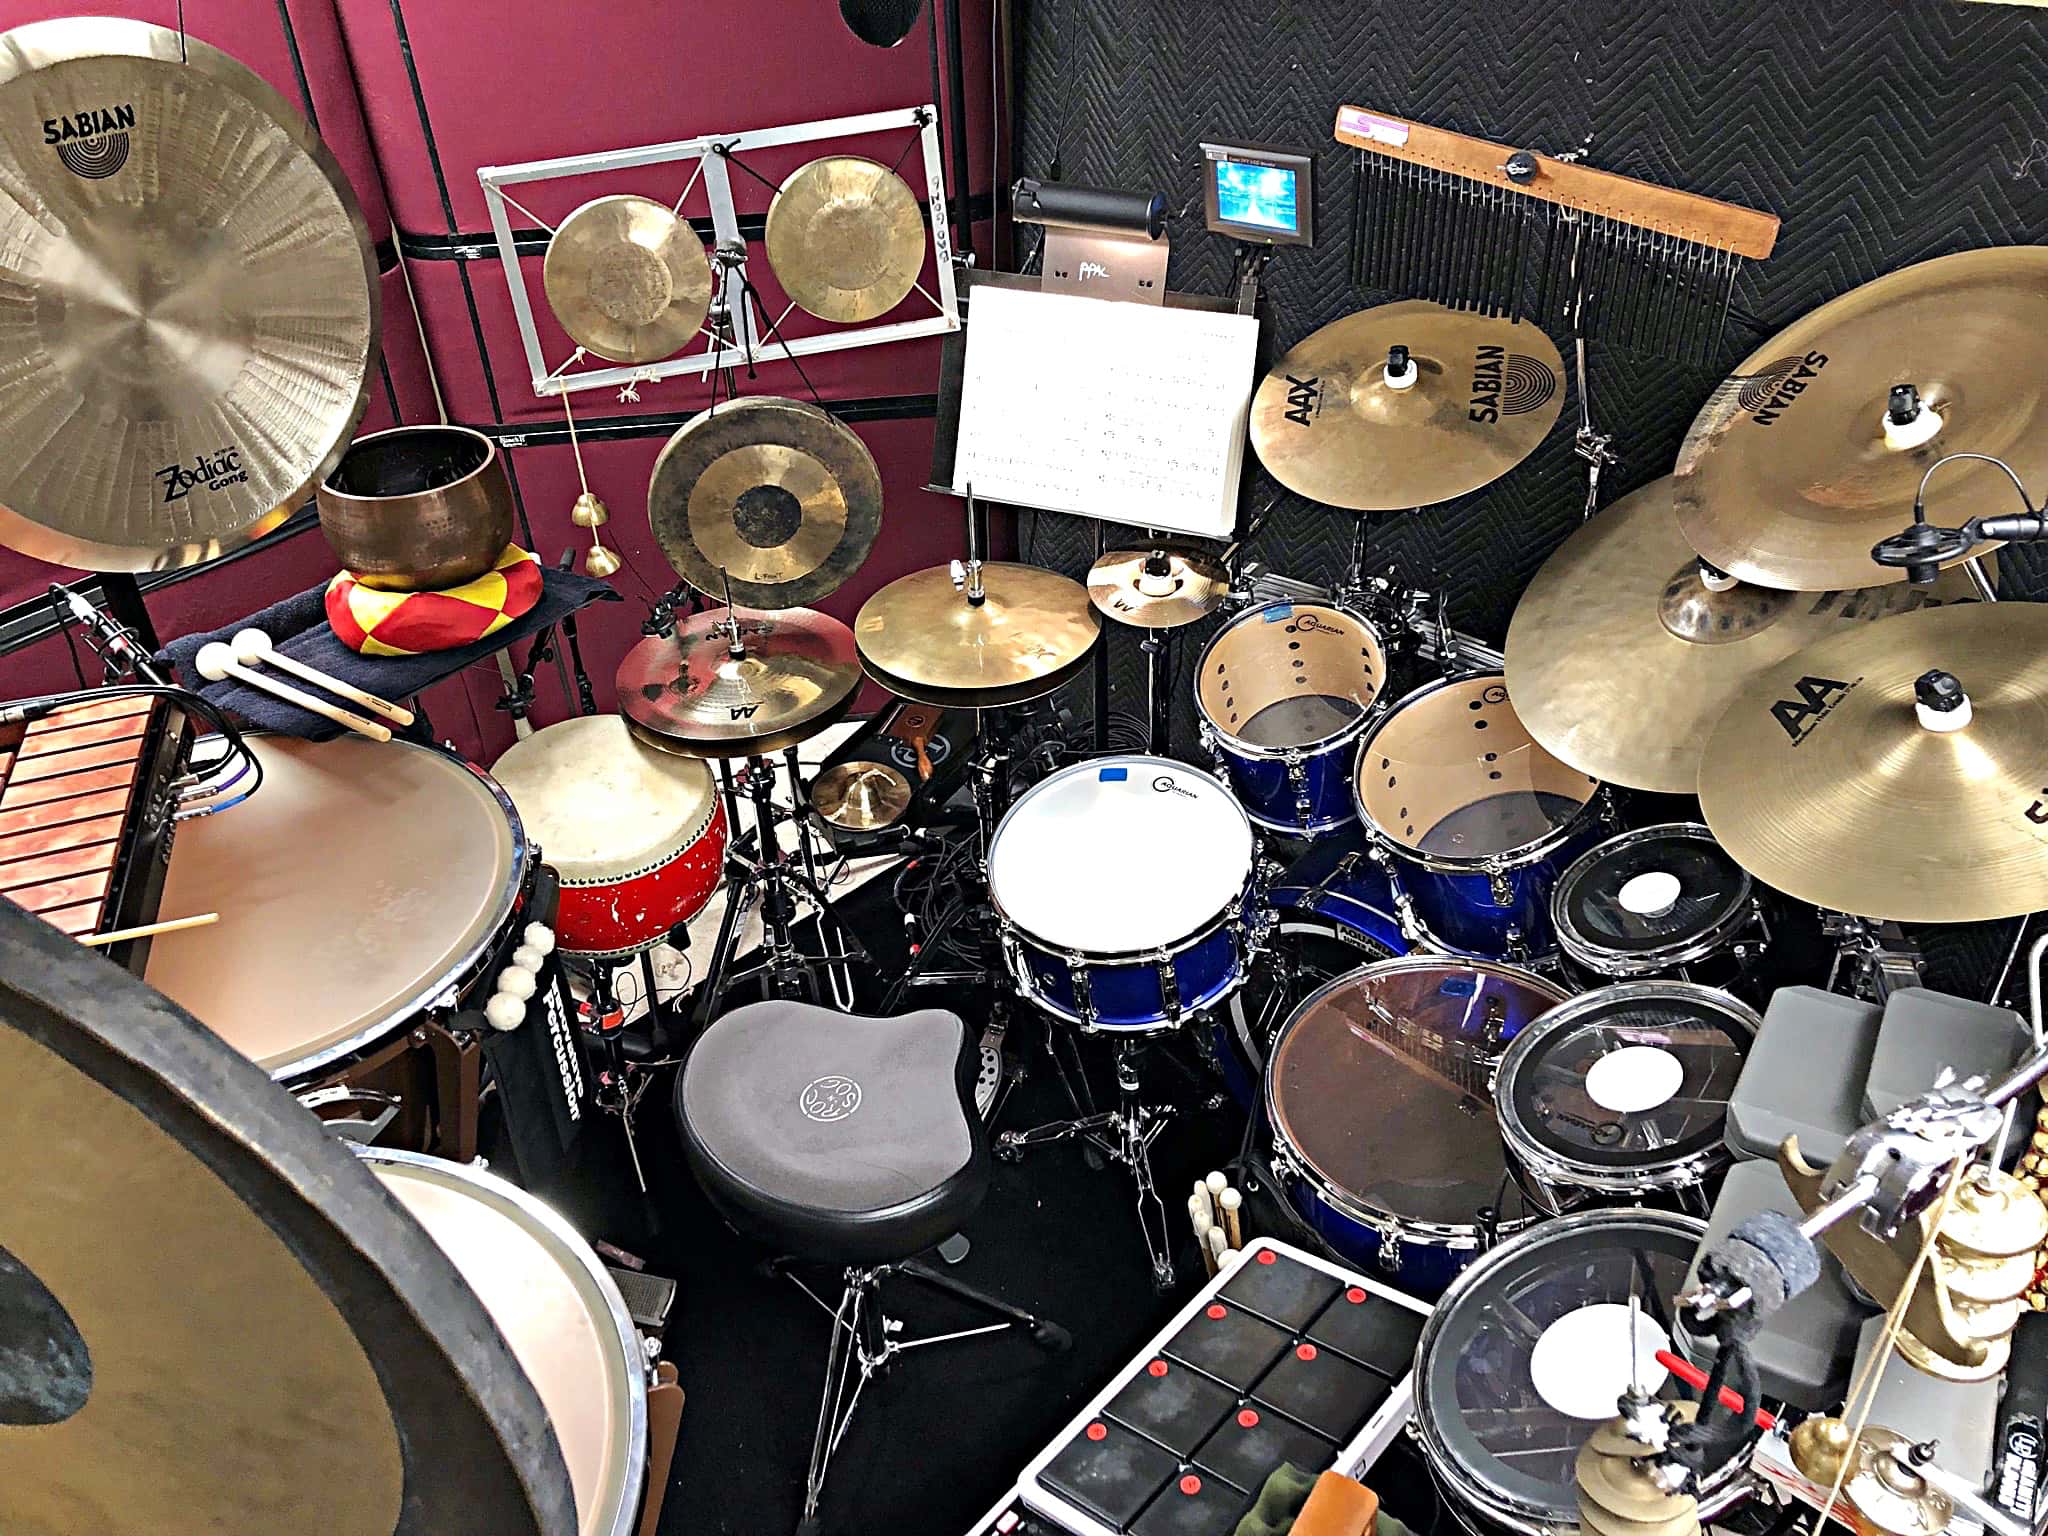 Russ Nyberg's combined book setup for the 2018-2019 National Tour of Miss Saigon at the Providence Performing Arts Center in Providence, Rhode Island.